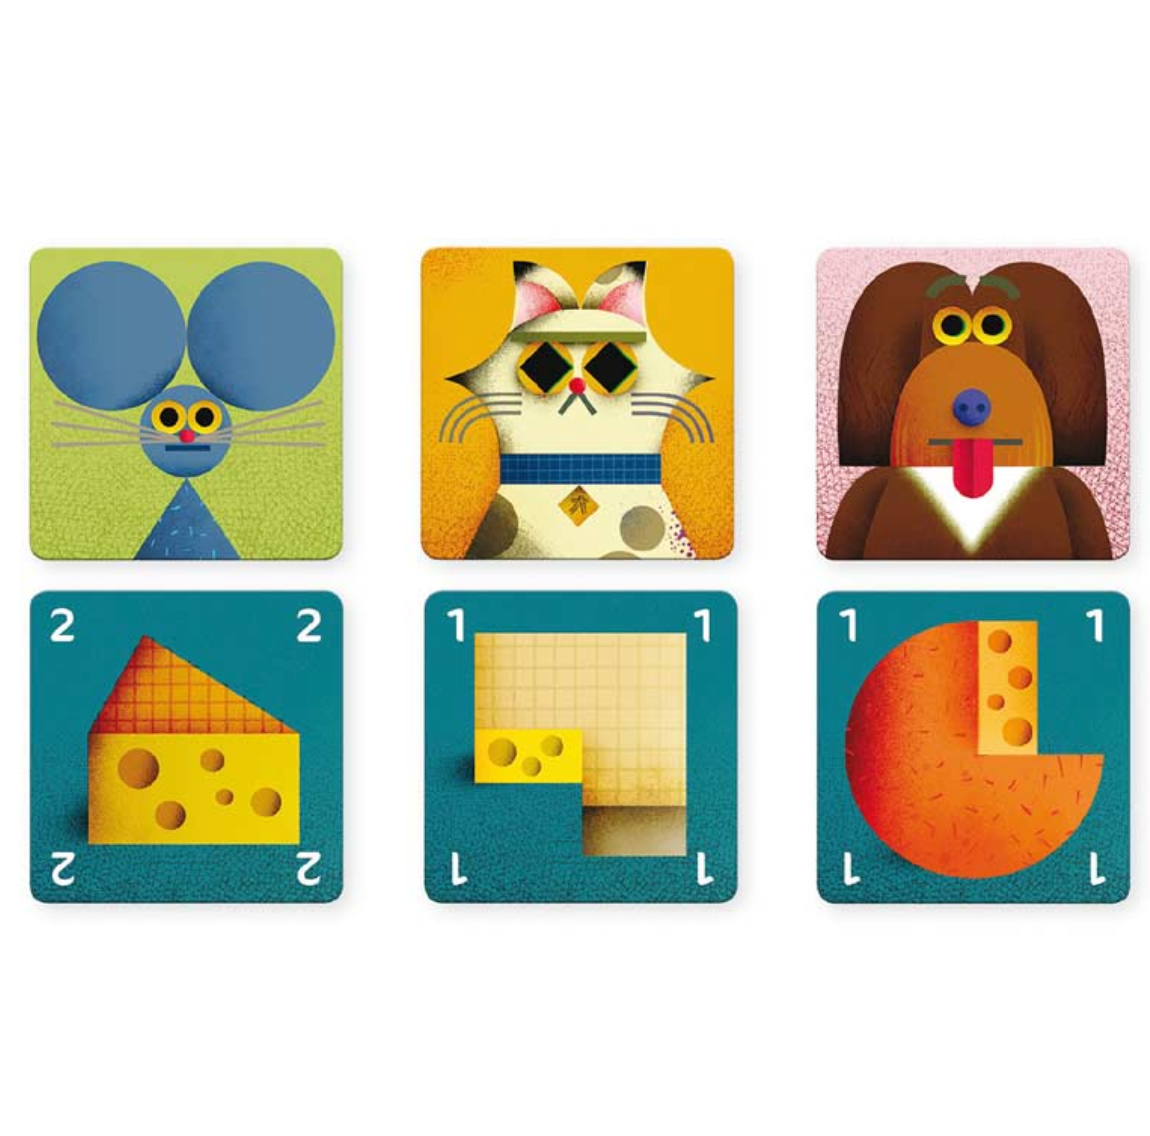 Djeco Games - Playing cards Cheese rescue